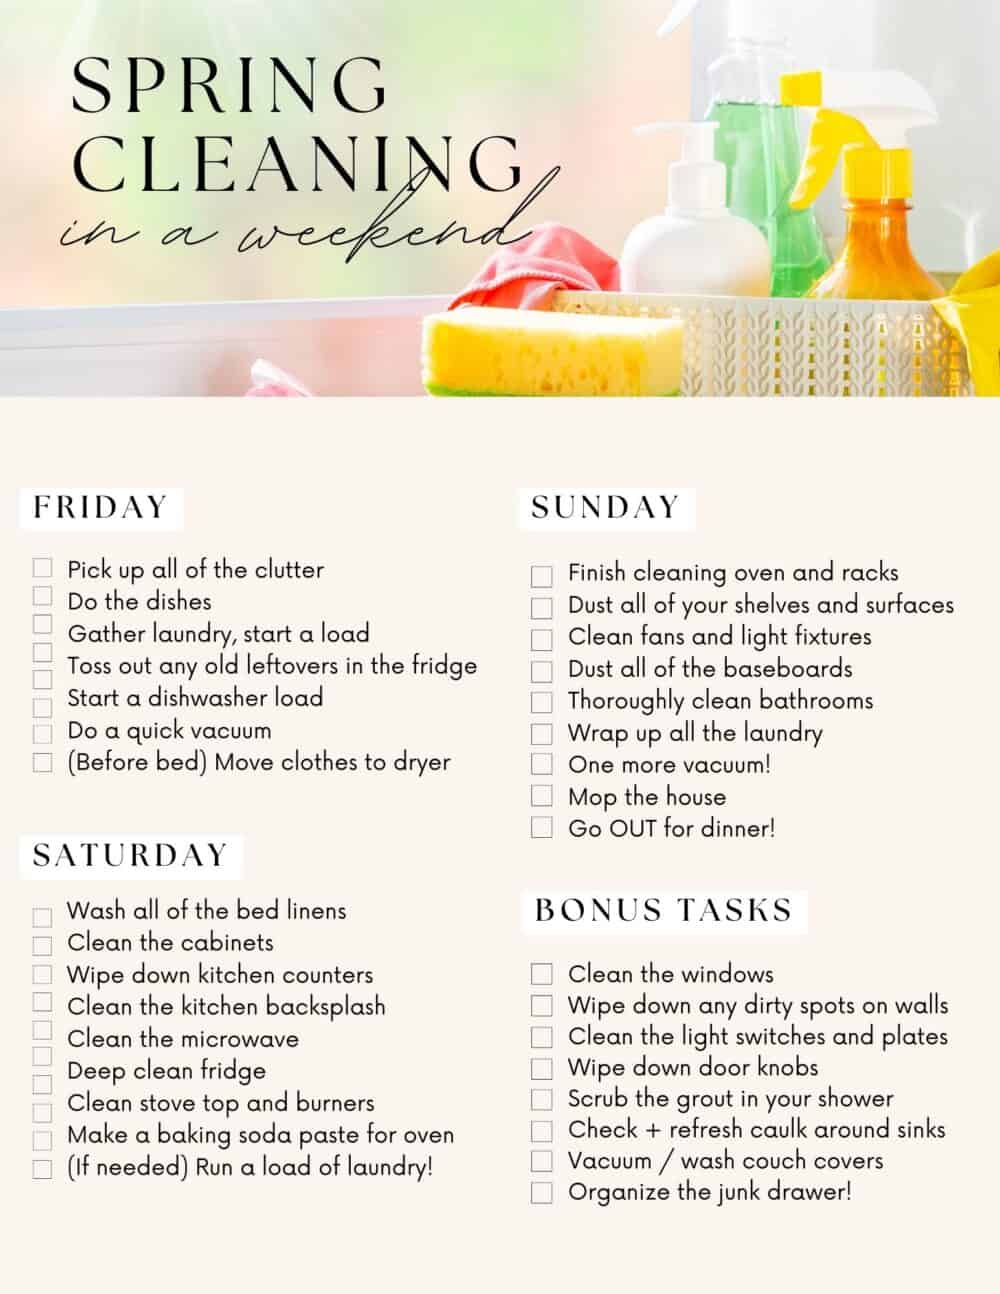 https://www.loveandrenovations.com/wp-content/uploads/2017/03/Green-and-Beige-Organic-Natural-Cleaning-Checklist-1000x1294.jpg